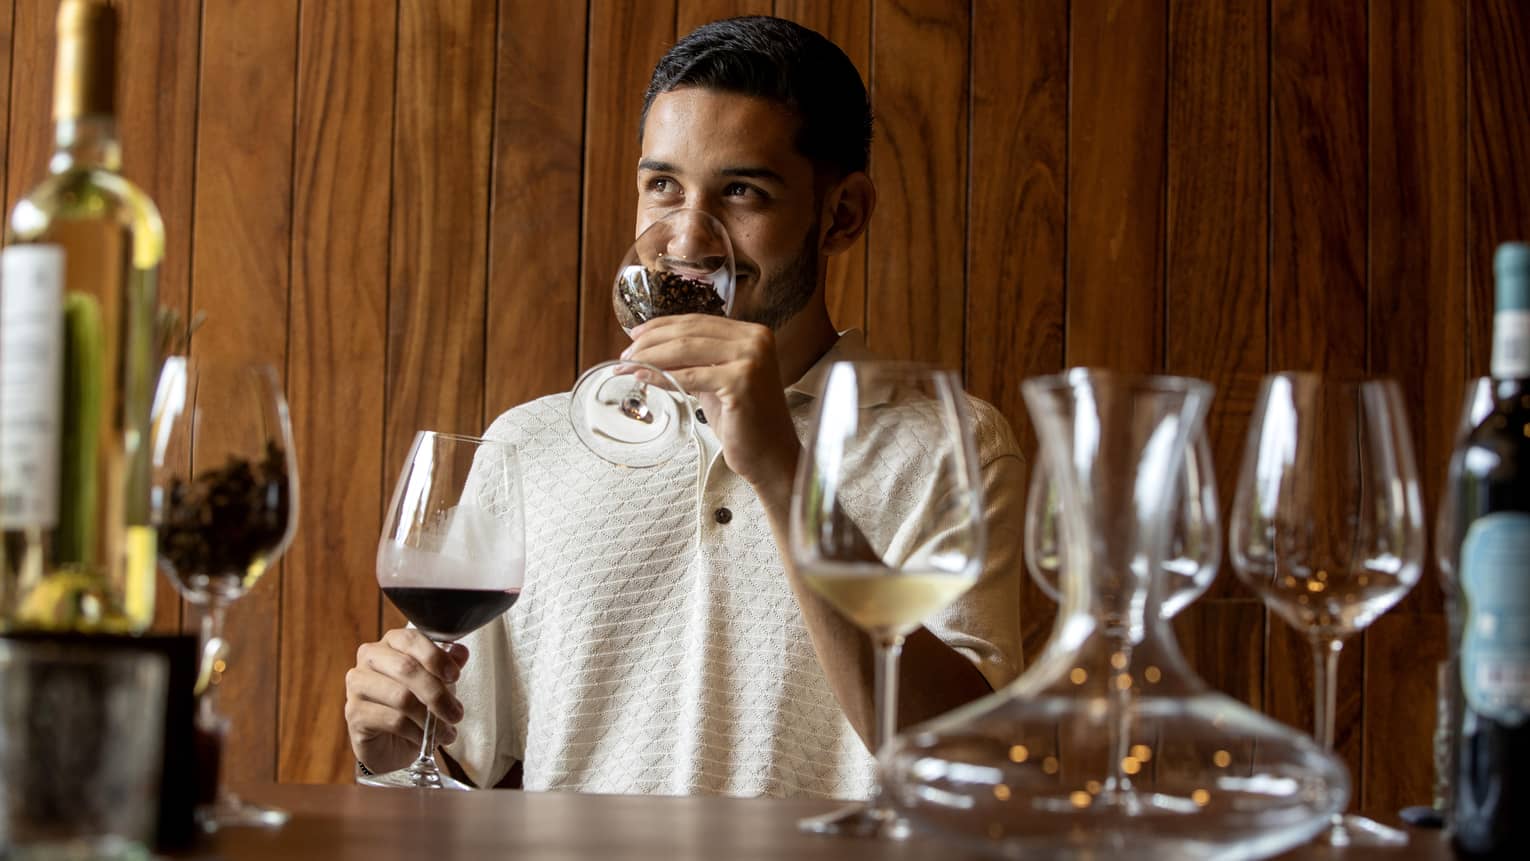 At a wine tasting, a guest smells coffee beans in a glass before tasting the glass of dark red wine held in his other hand. 